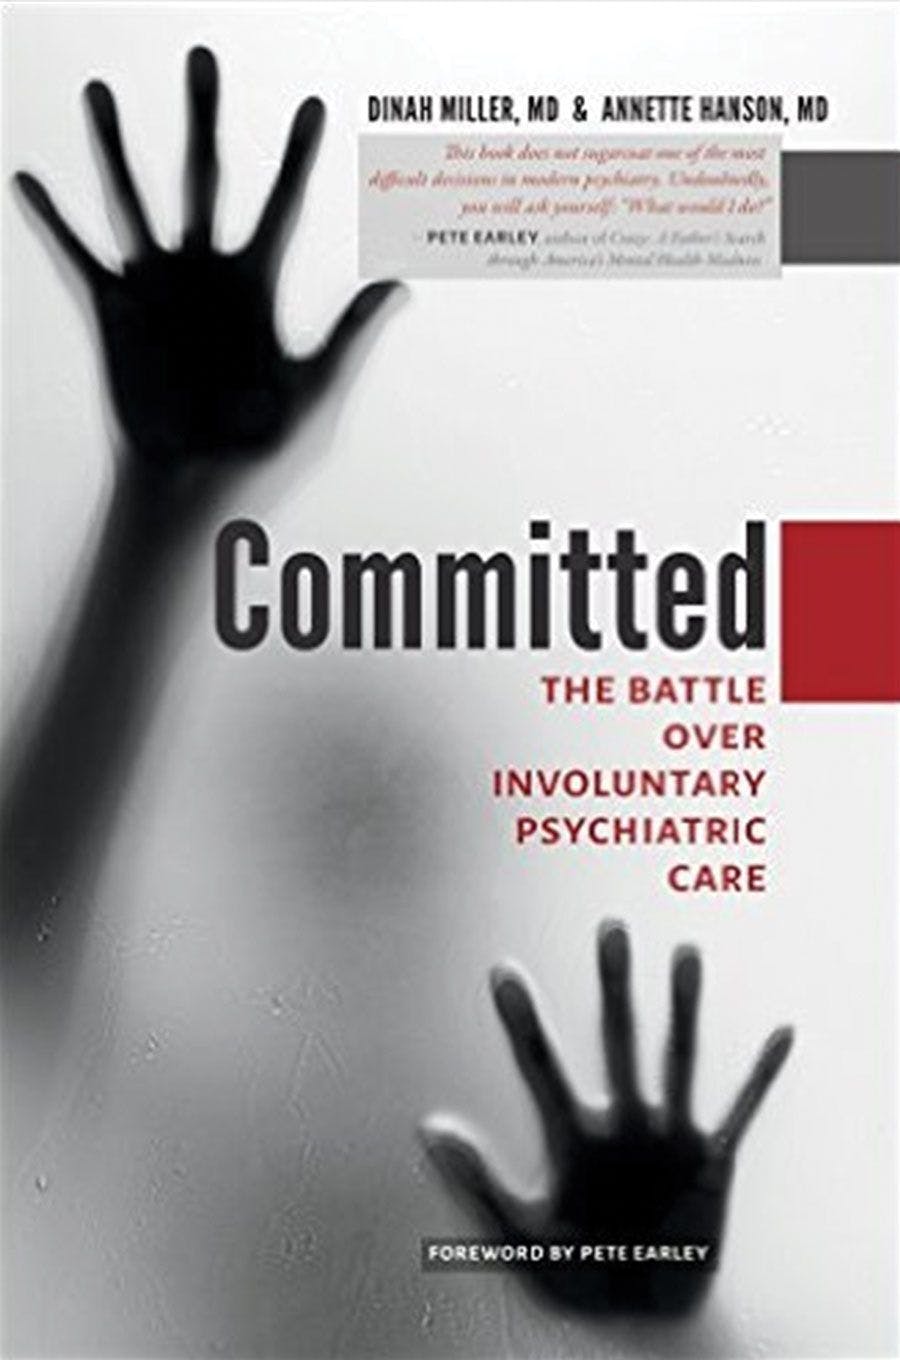 Committed: The Battle Over Involuntary Psychiatric Care